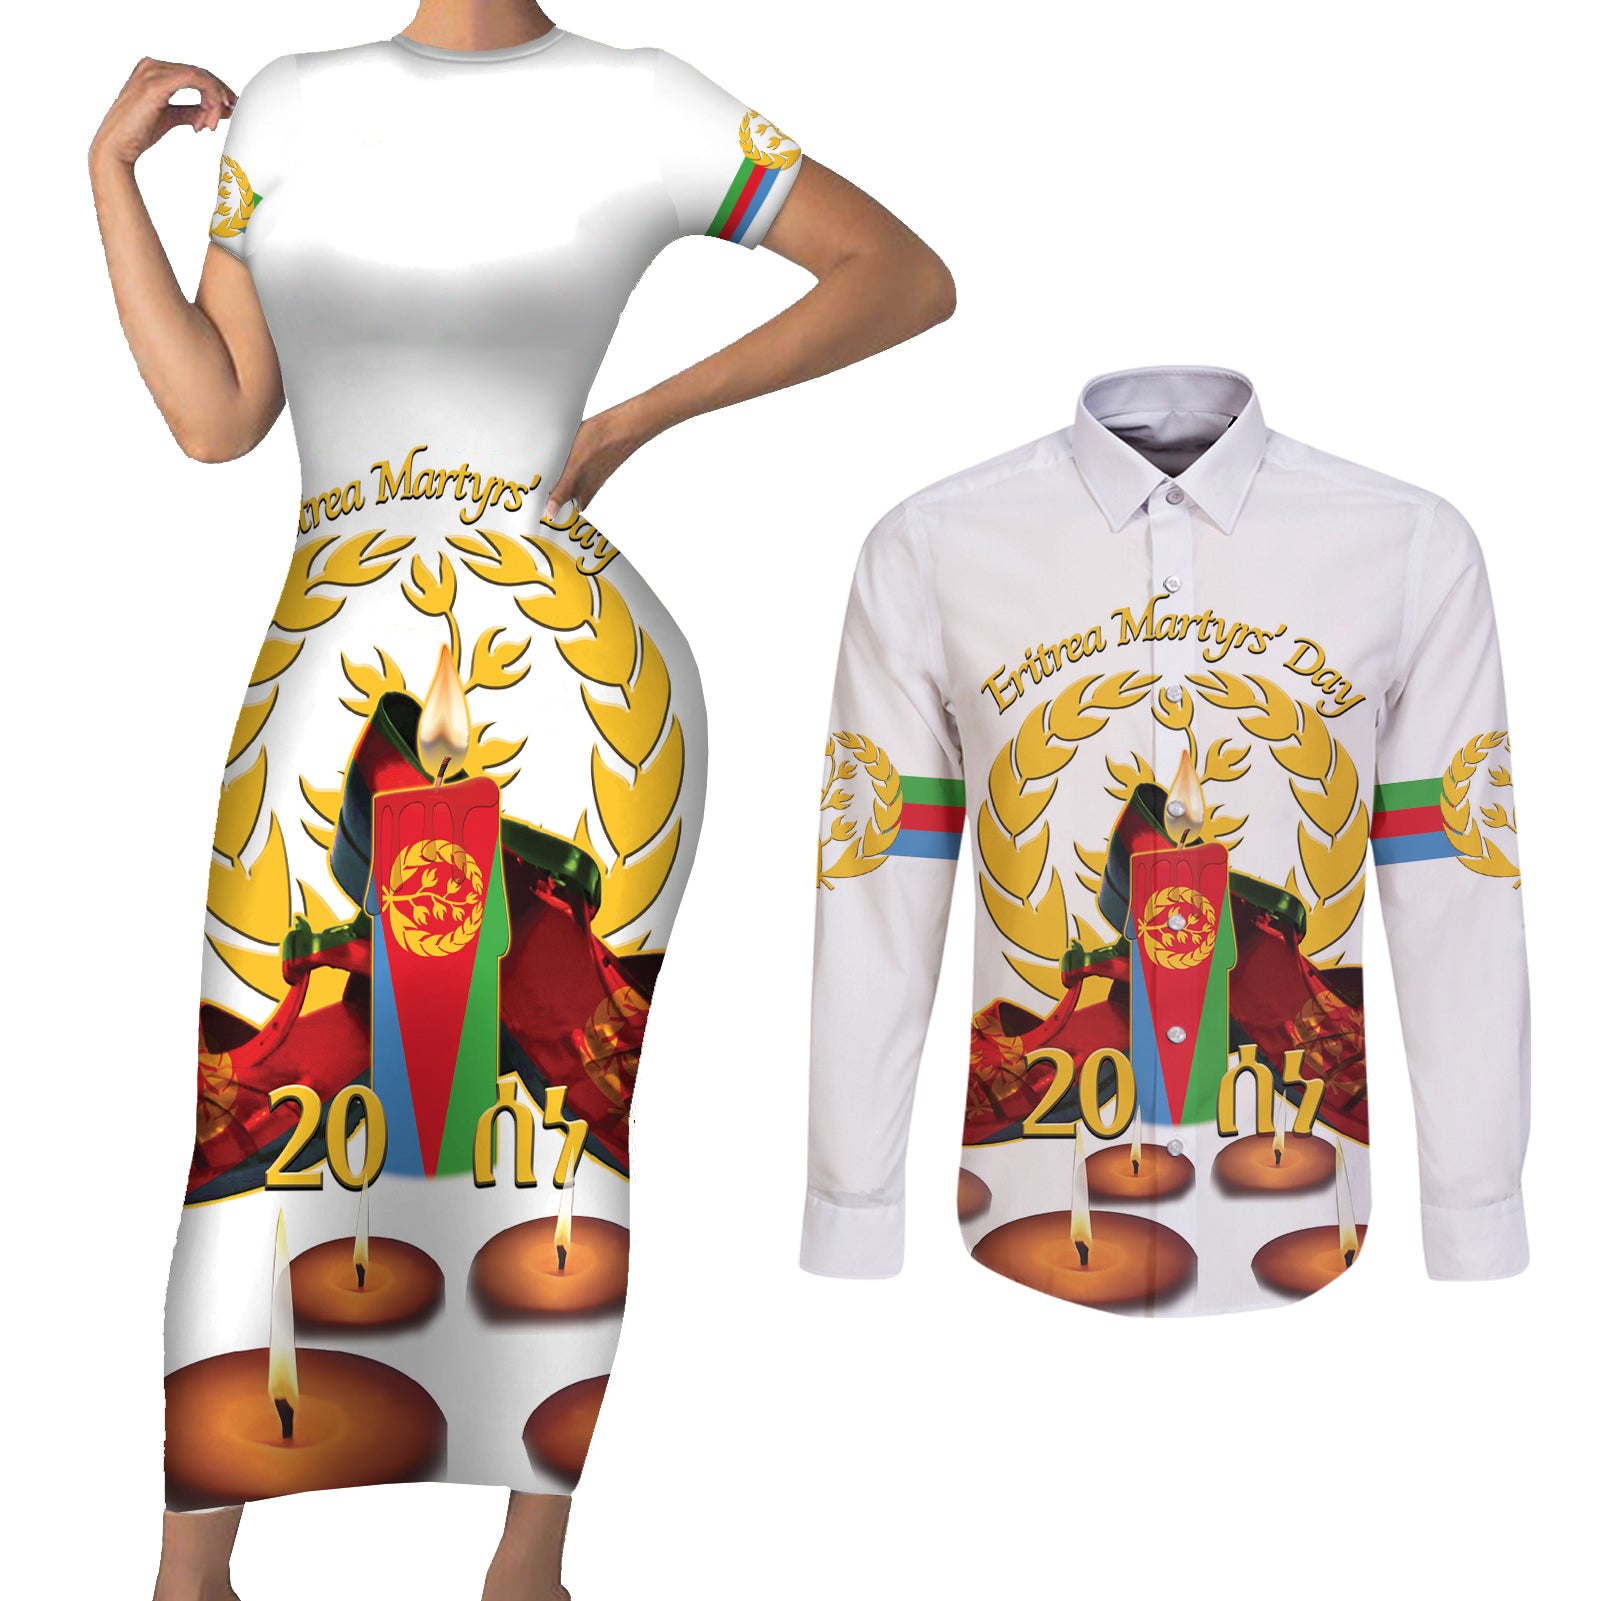 Custom Eritrea Martyrs' Day Couples Matching Short Sleeve Bodycon Dress and Long Sleeve Button Shirt 20 June Shida Shoes With Candles - White